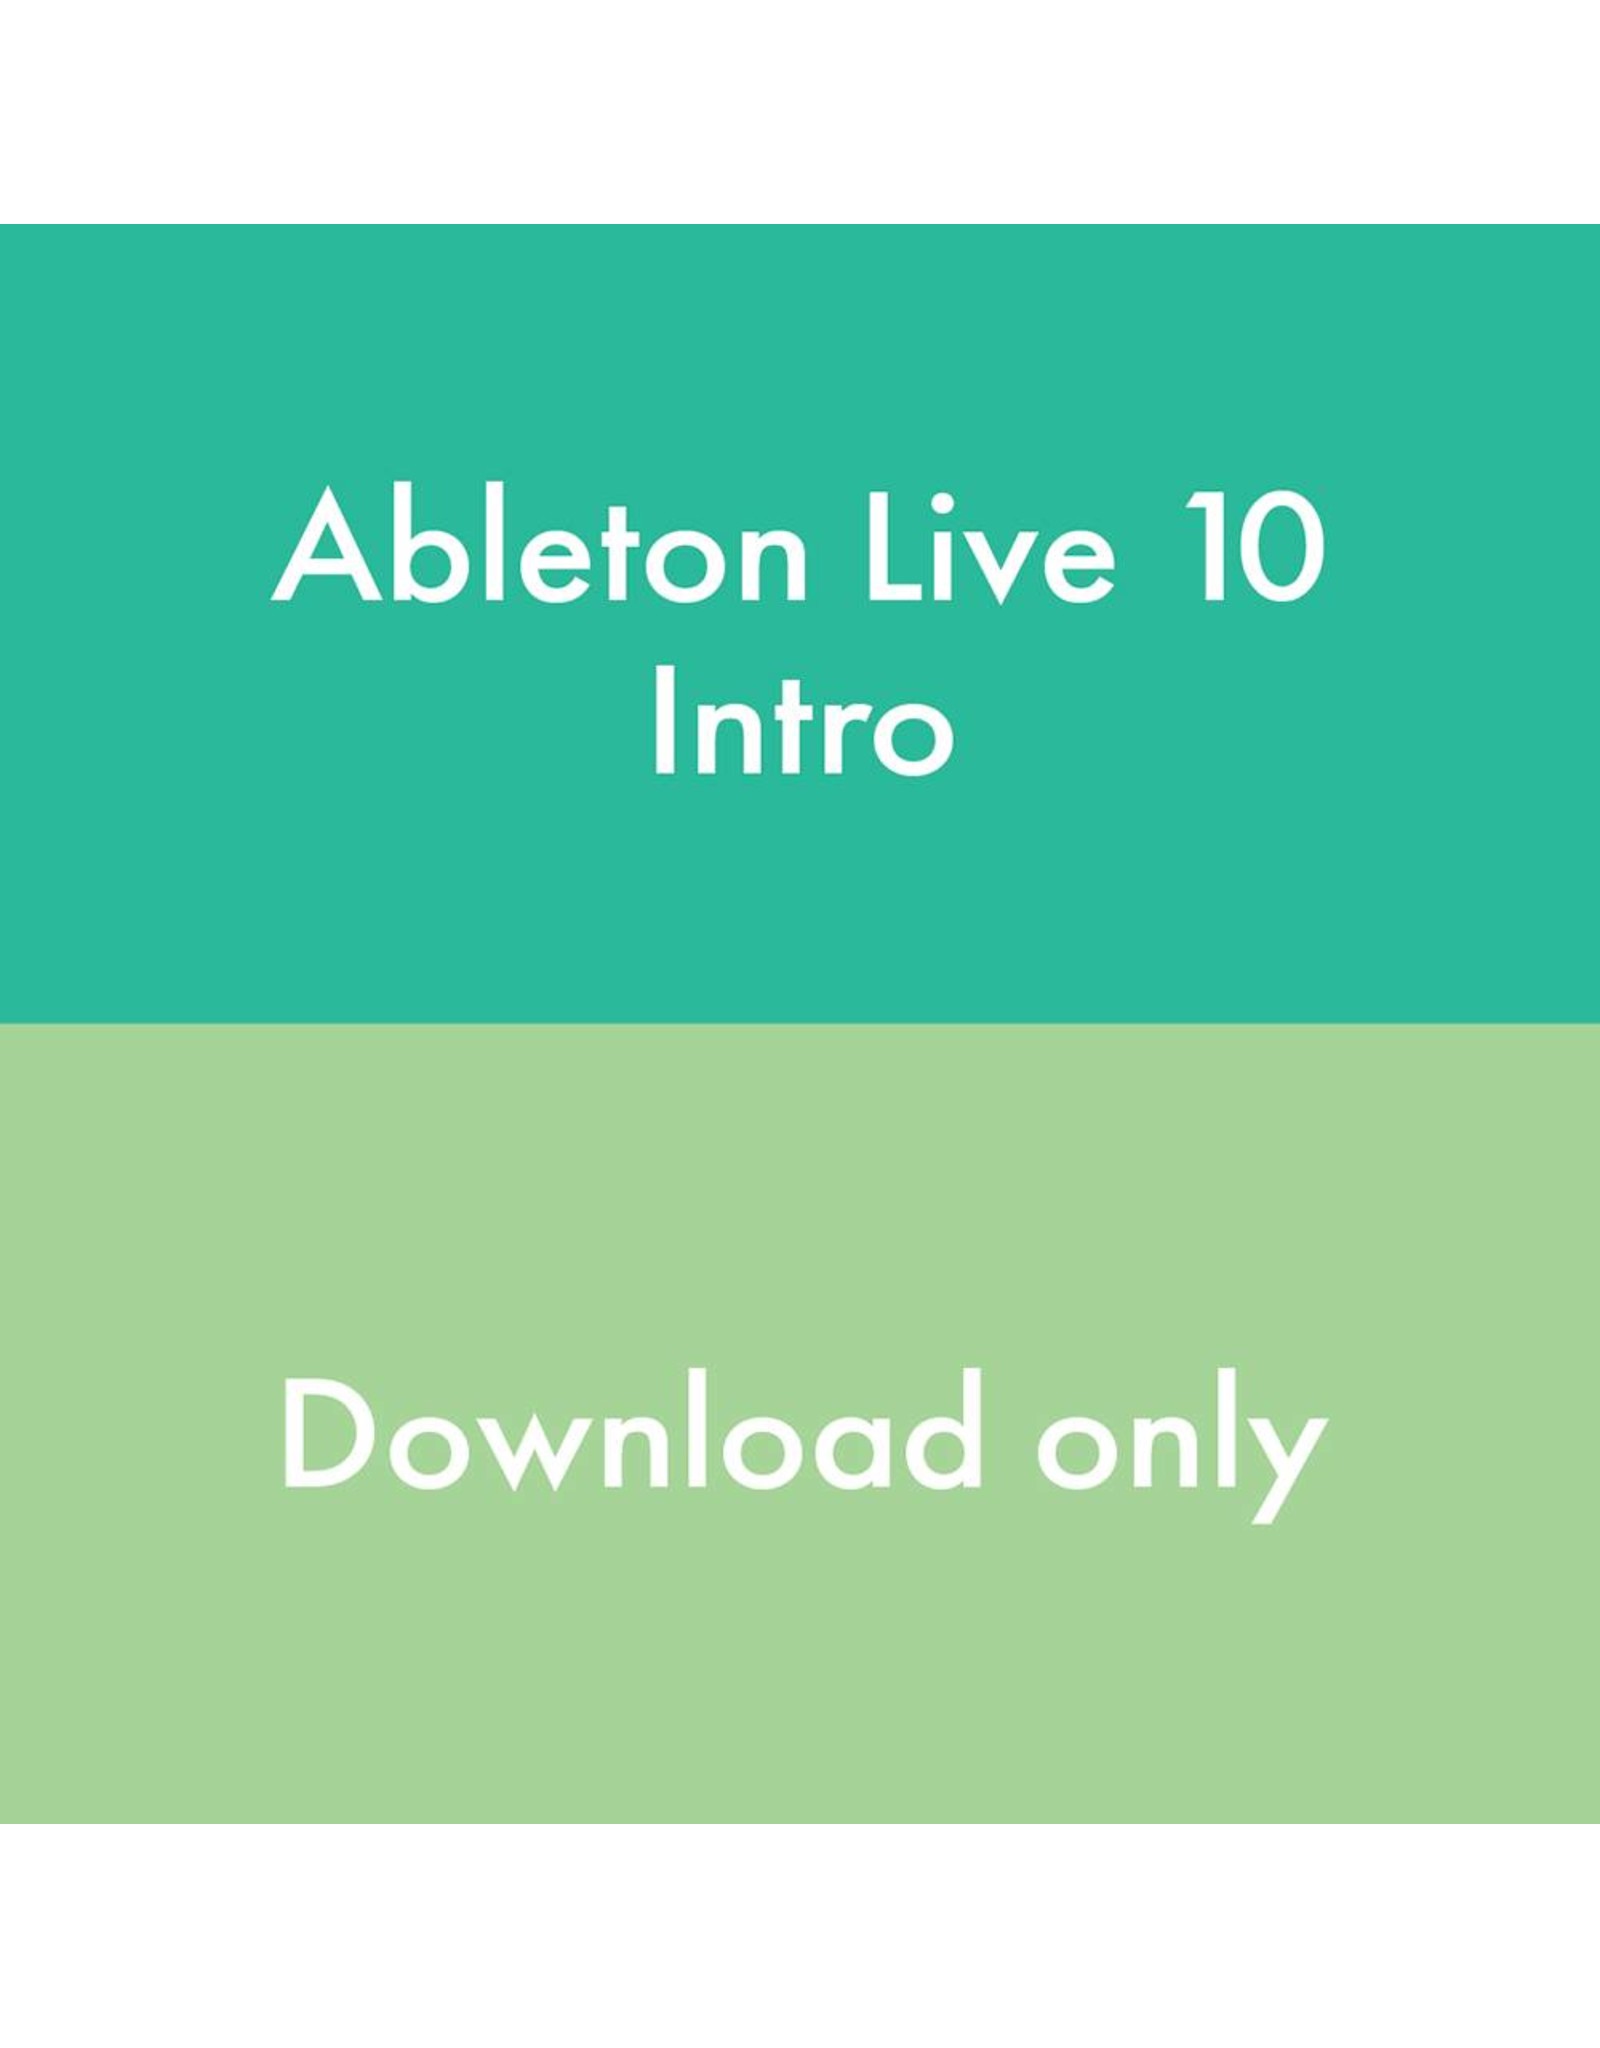 Ableton LIVE 10 INTRO 88183 download